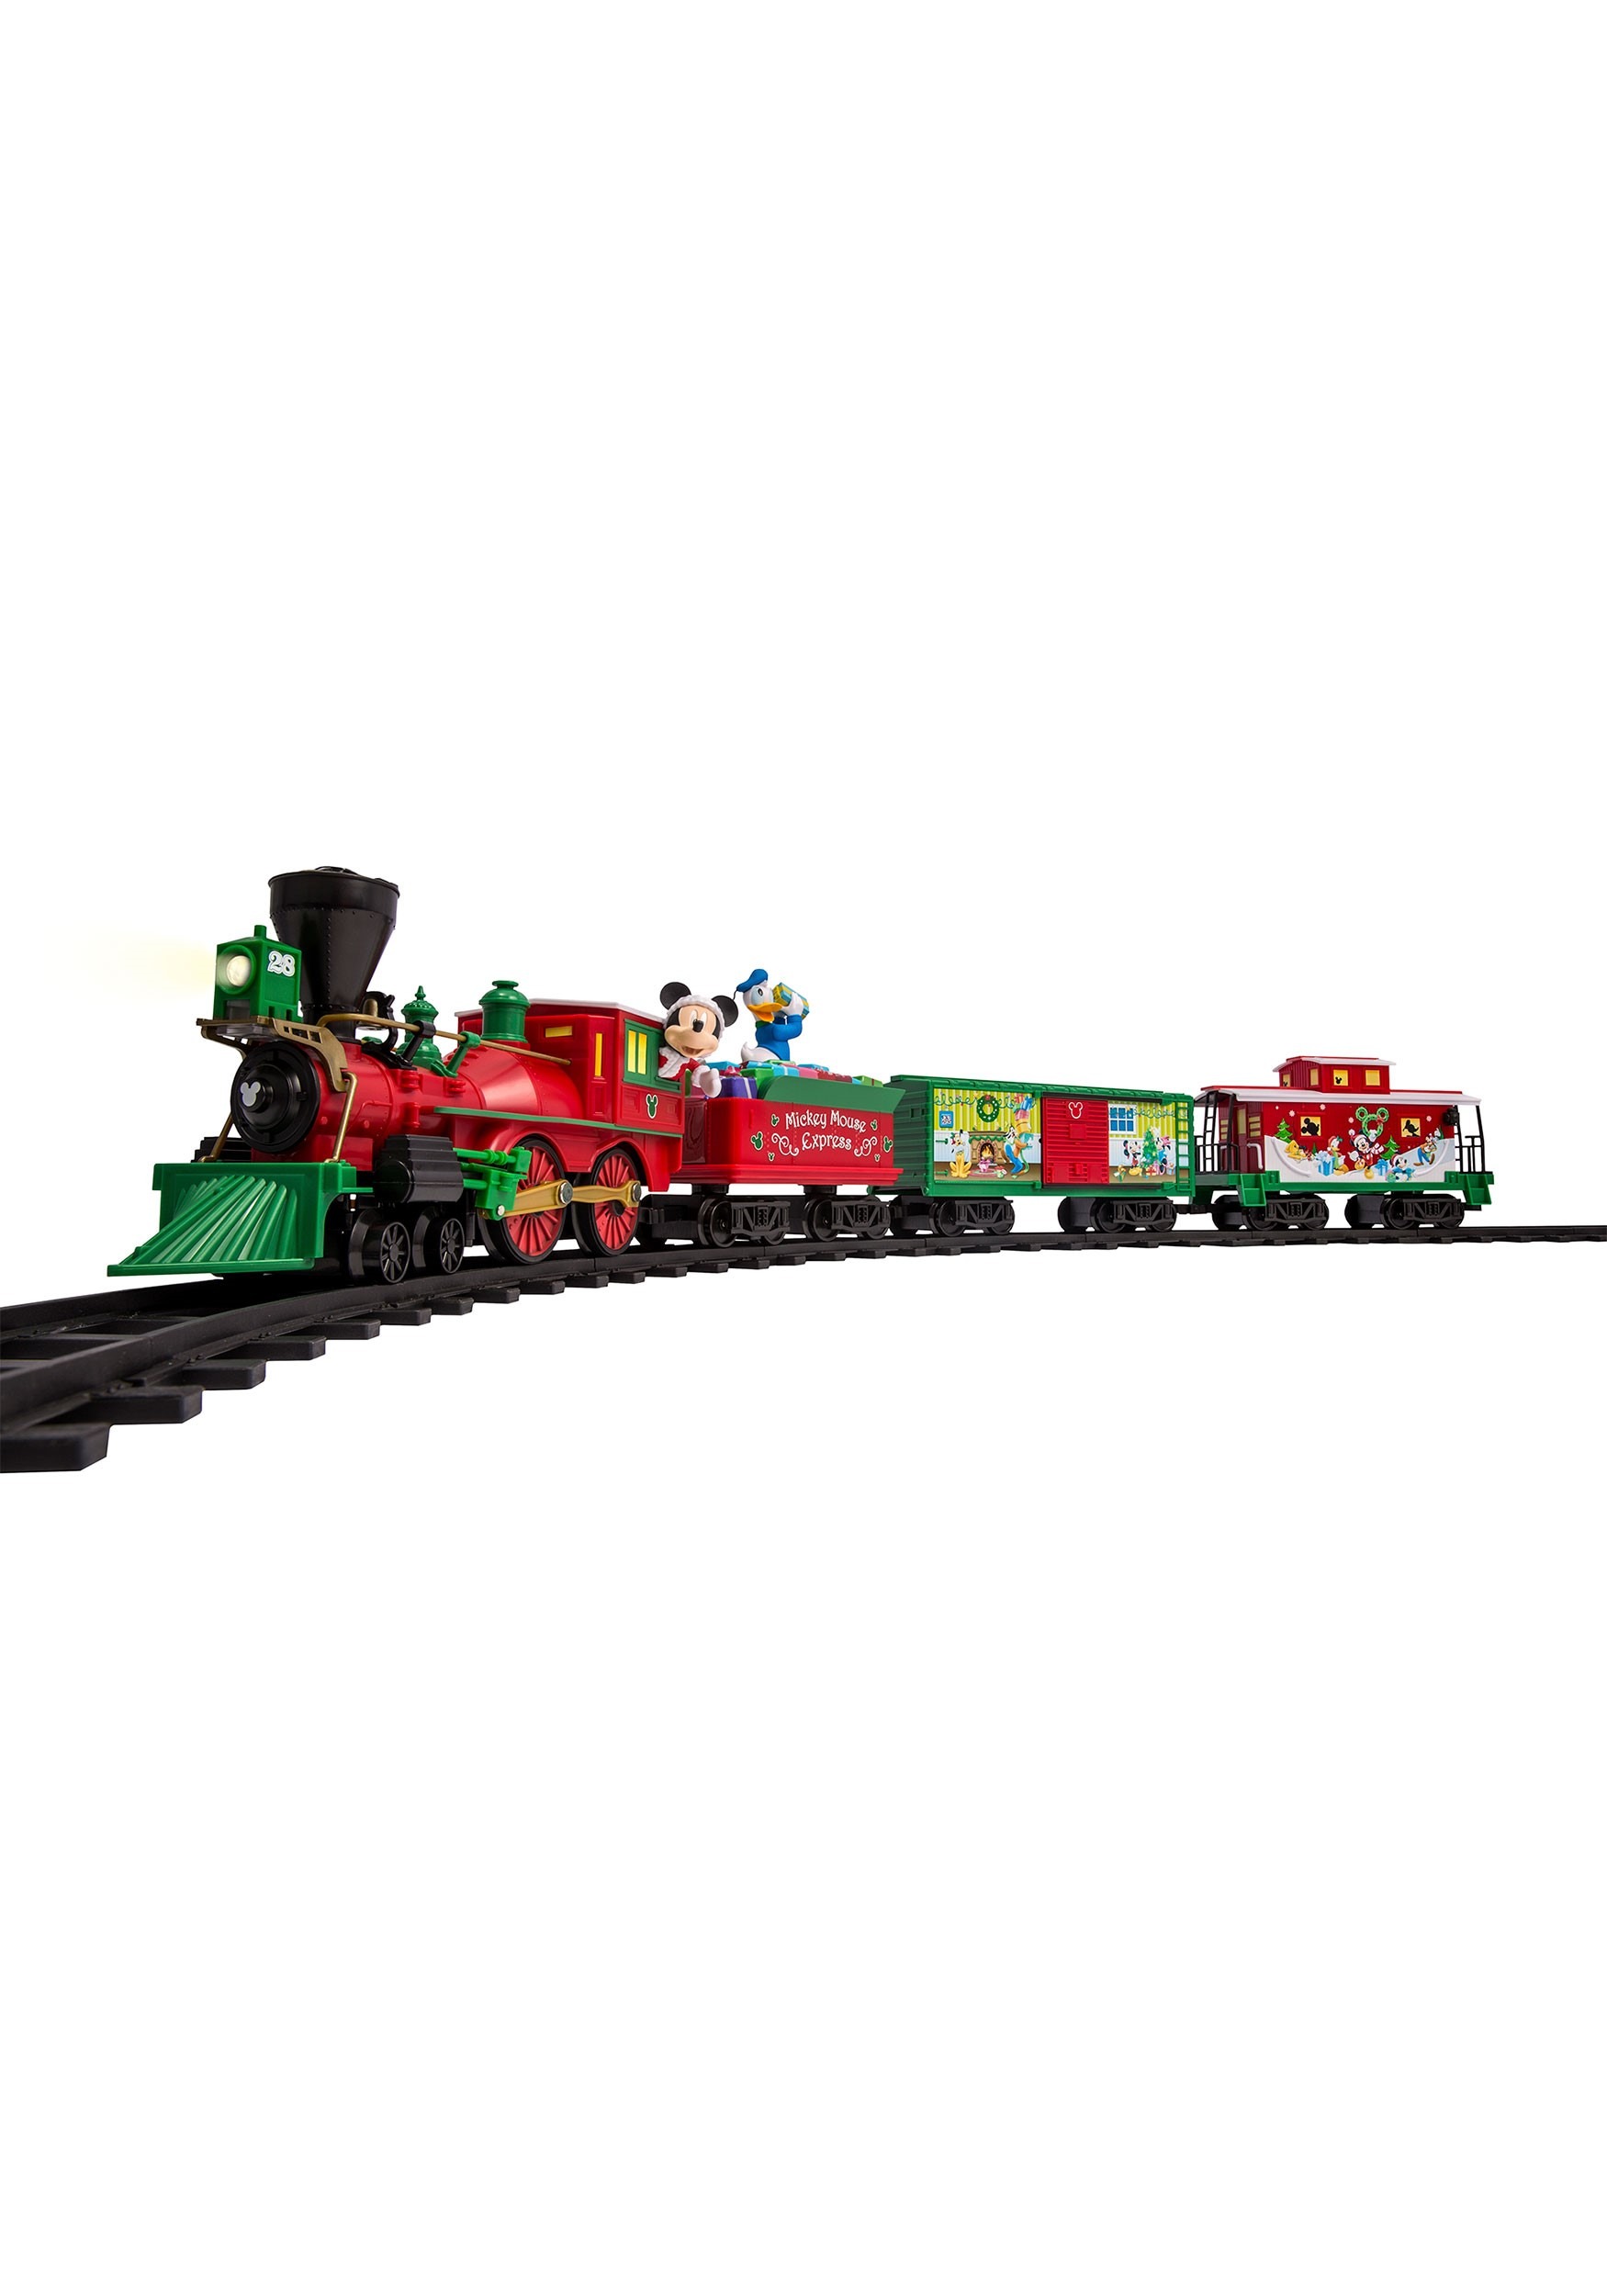 Mickey Mouse Express Ready-to-Play Lionel Train Set